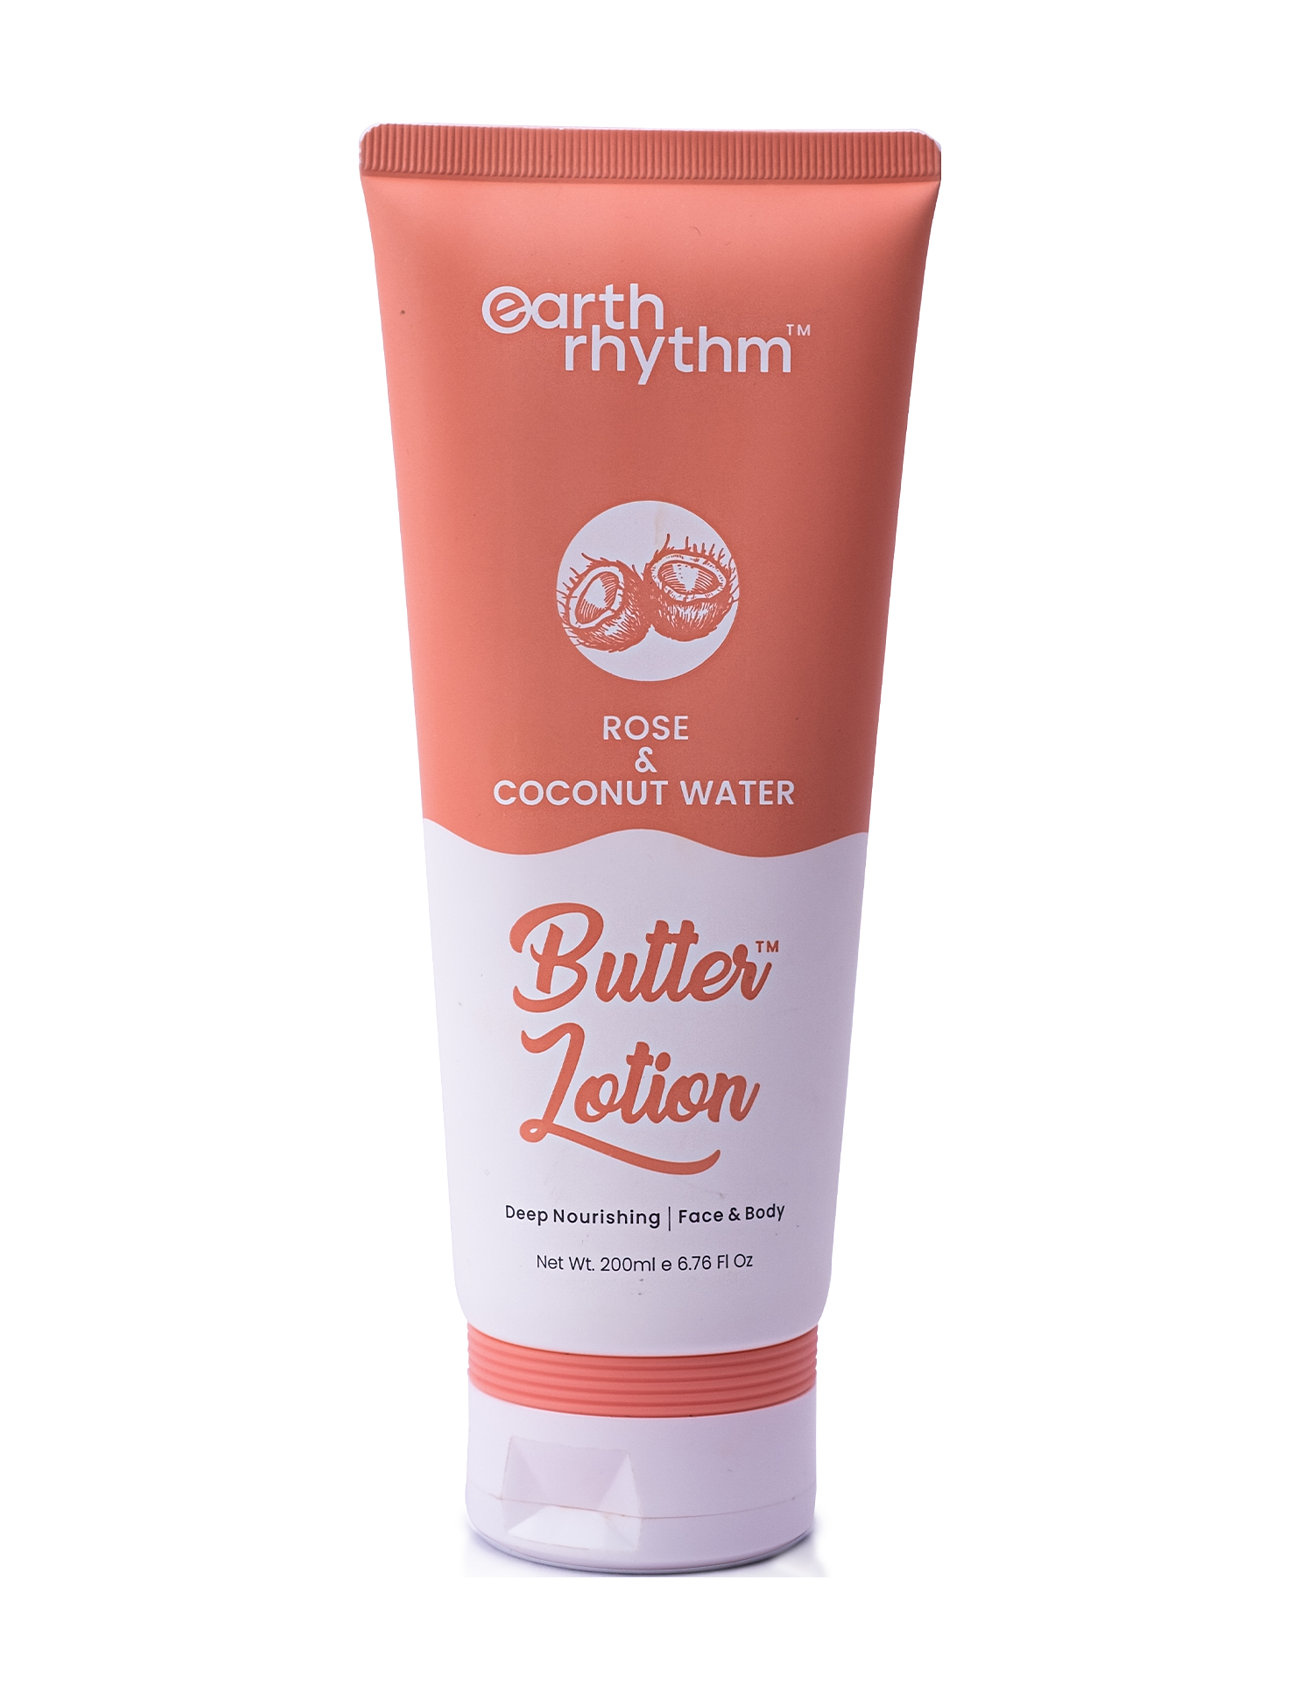 Rose & Coconut Water Butter Body Lotion Creme Lotion Bodybutter Nude Earth Rhythm